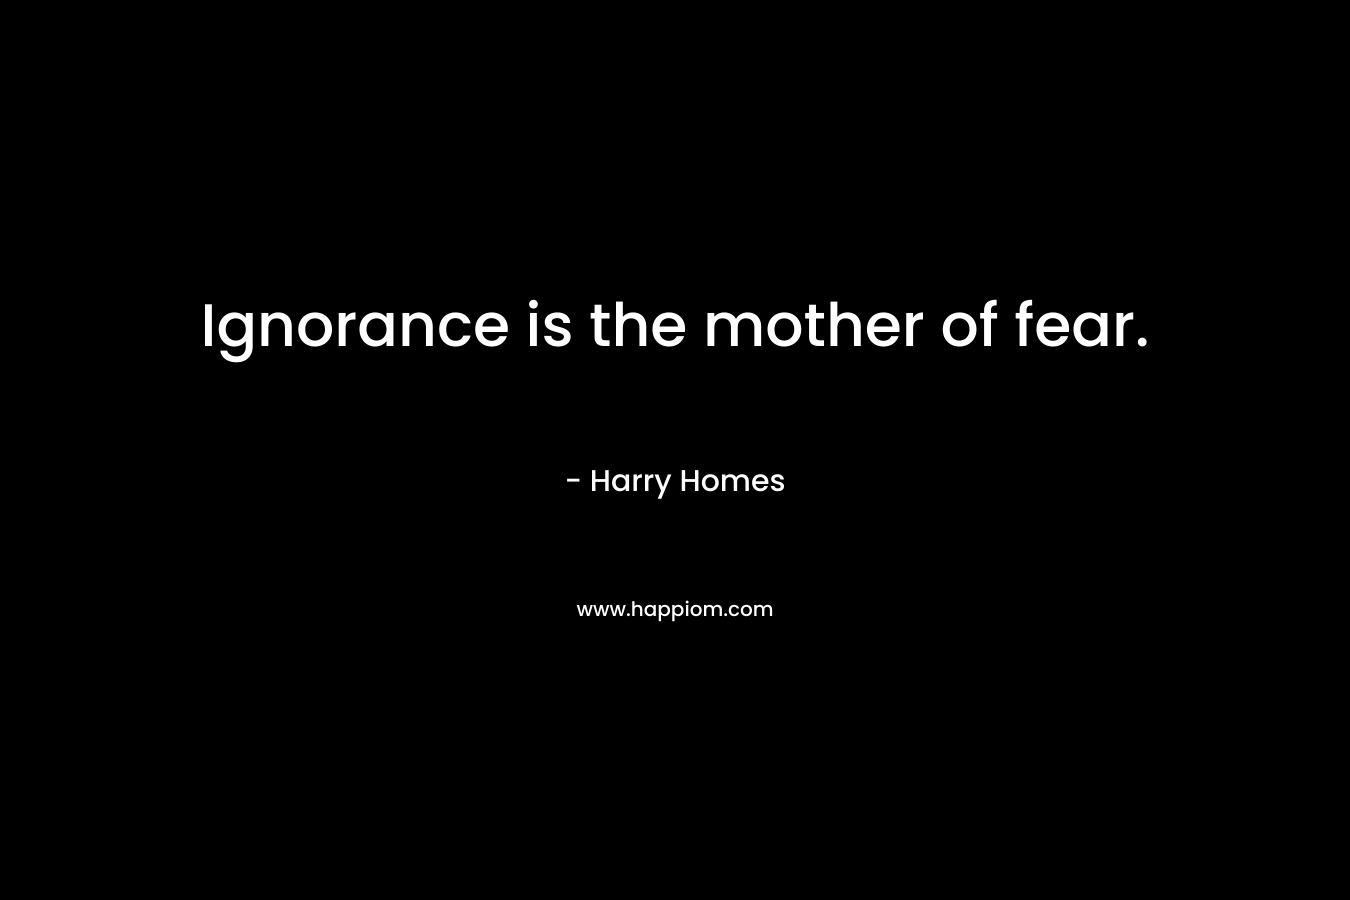 Ignorance is the mother of fear.